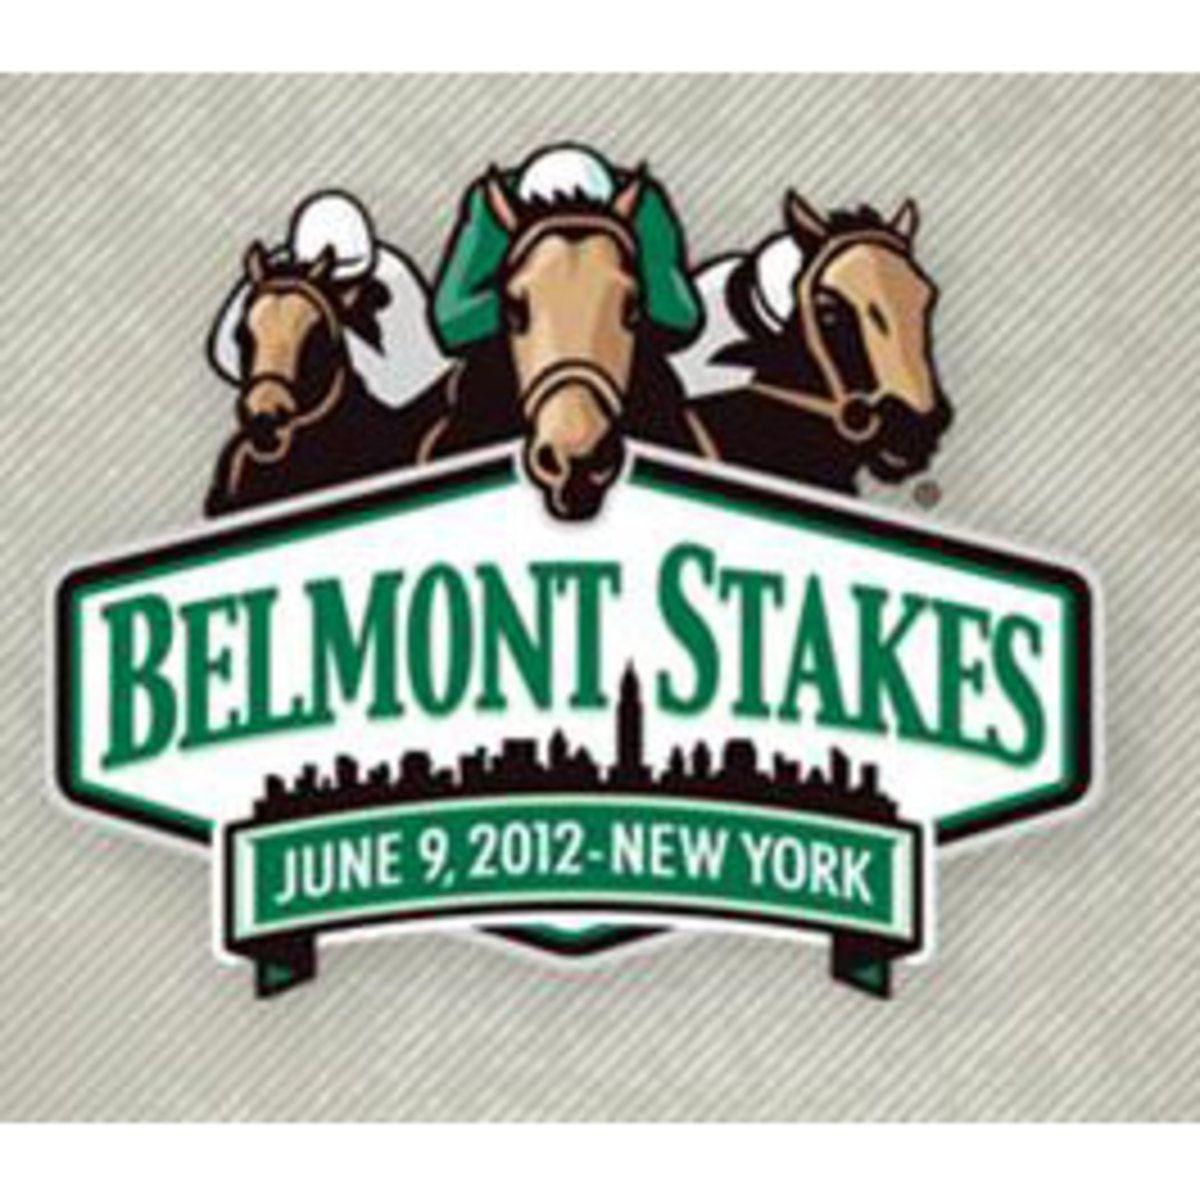 Belmont Logo - The 2012 Belmont advice on horse care and horse riding